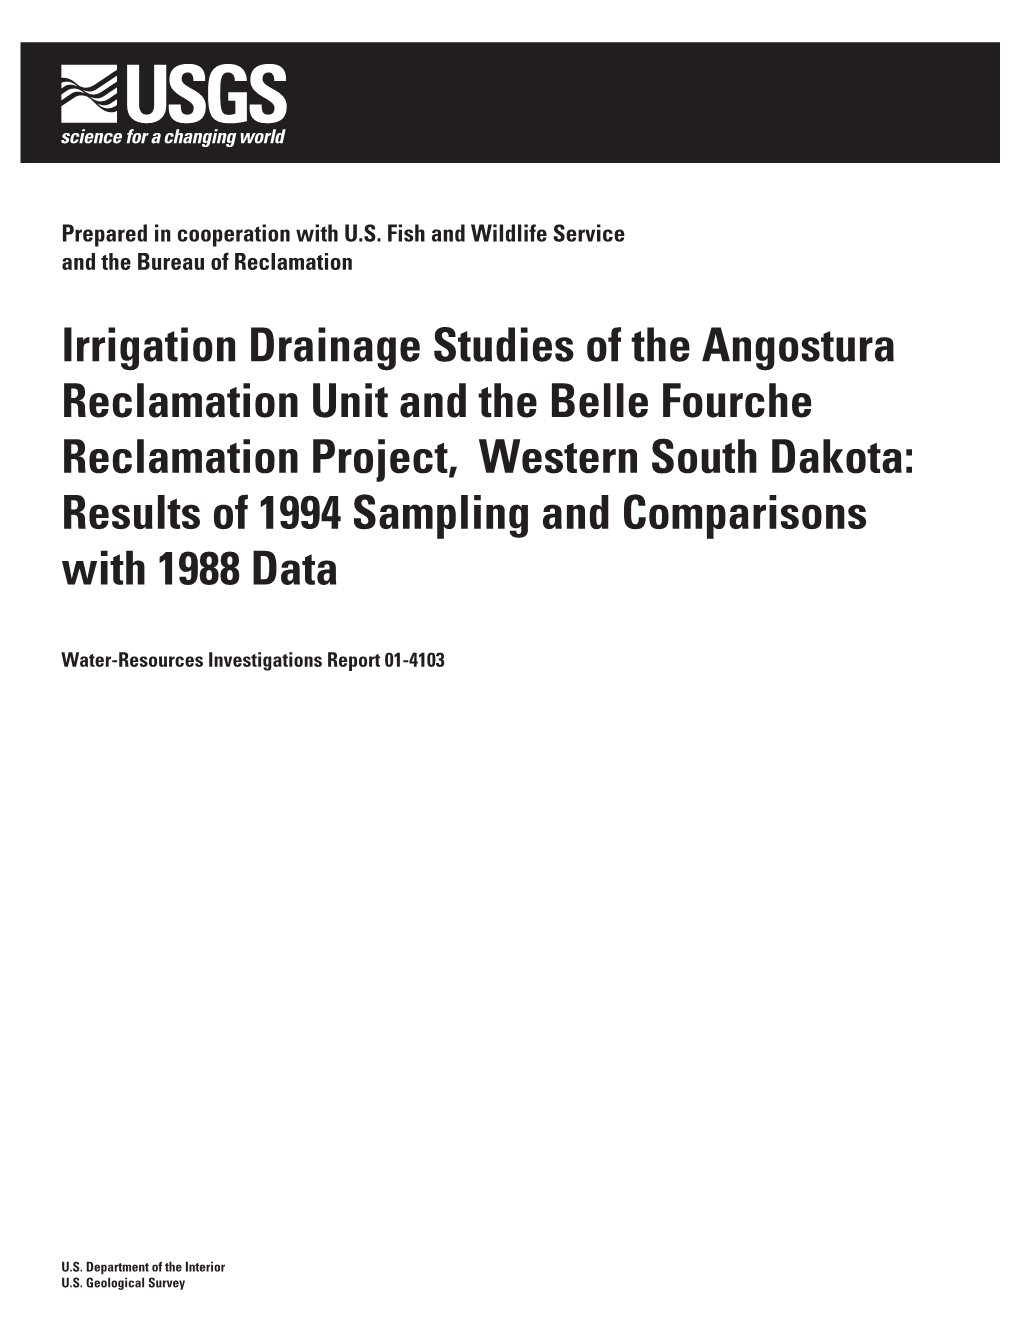 Irrigation Drainage Studies of the Angostura Reclamation Unit And